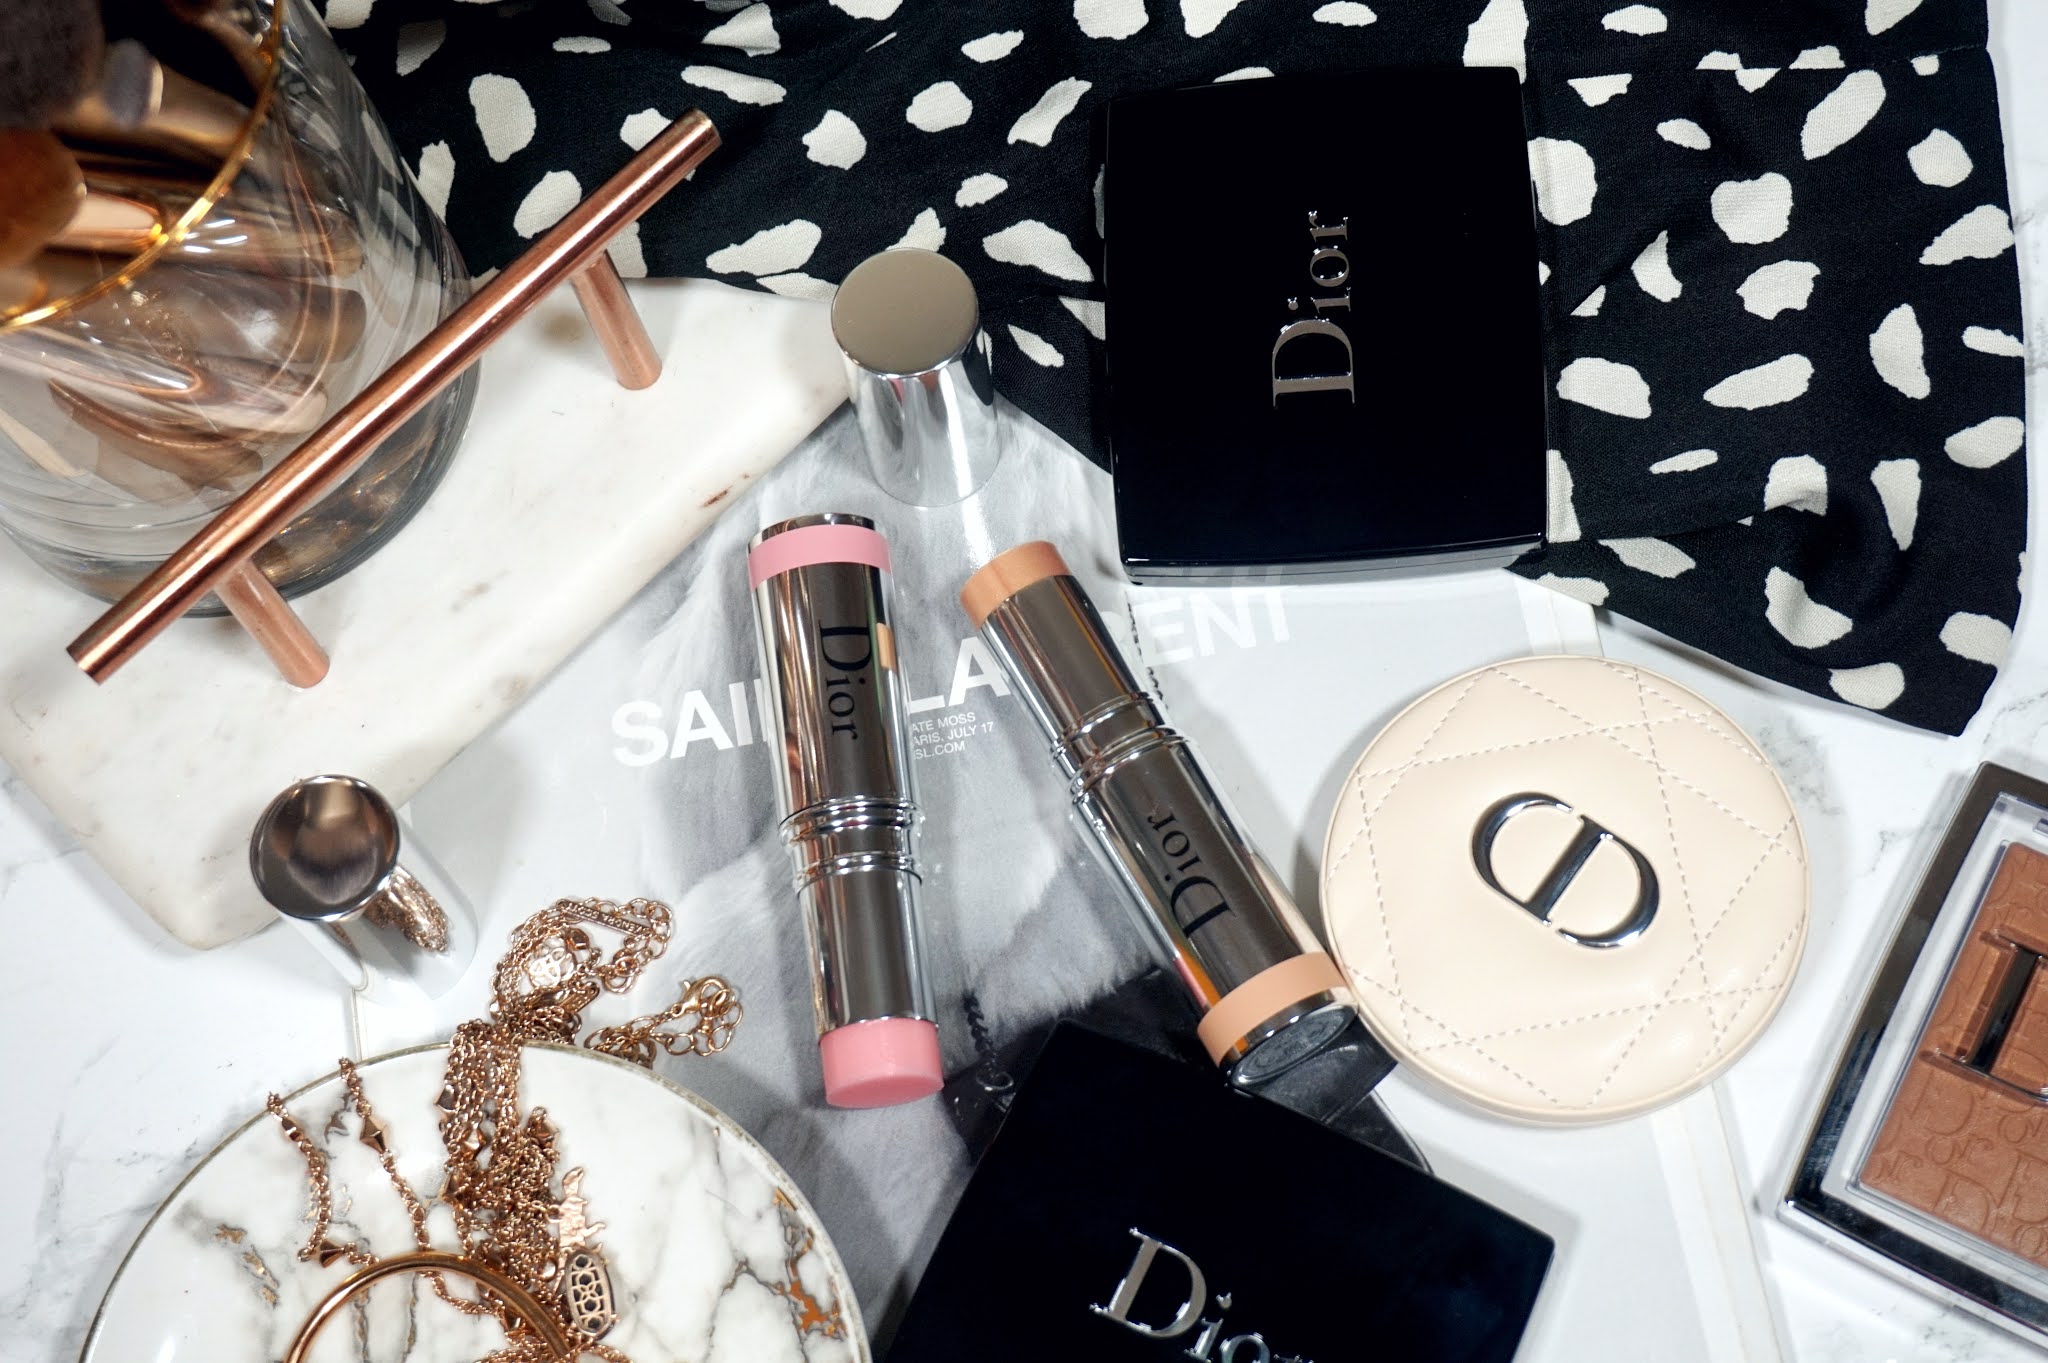 Dior DiorSkin Summer Dune Collection Stick Glow Blush Review and Swatches